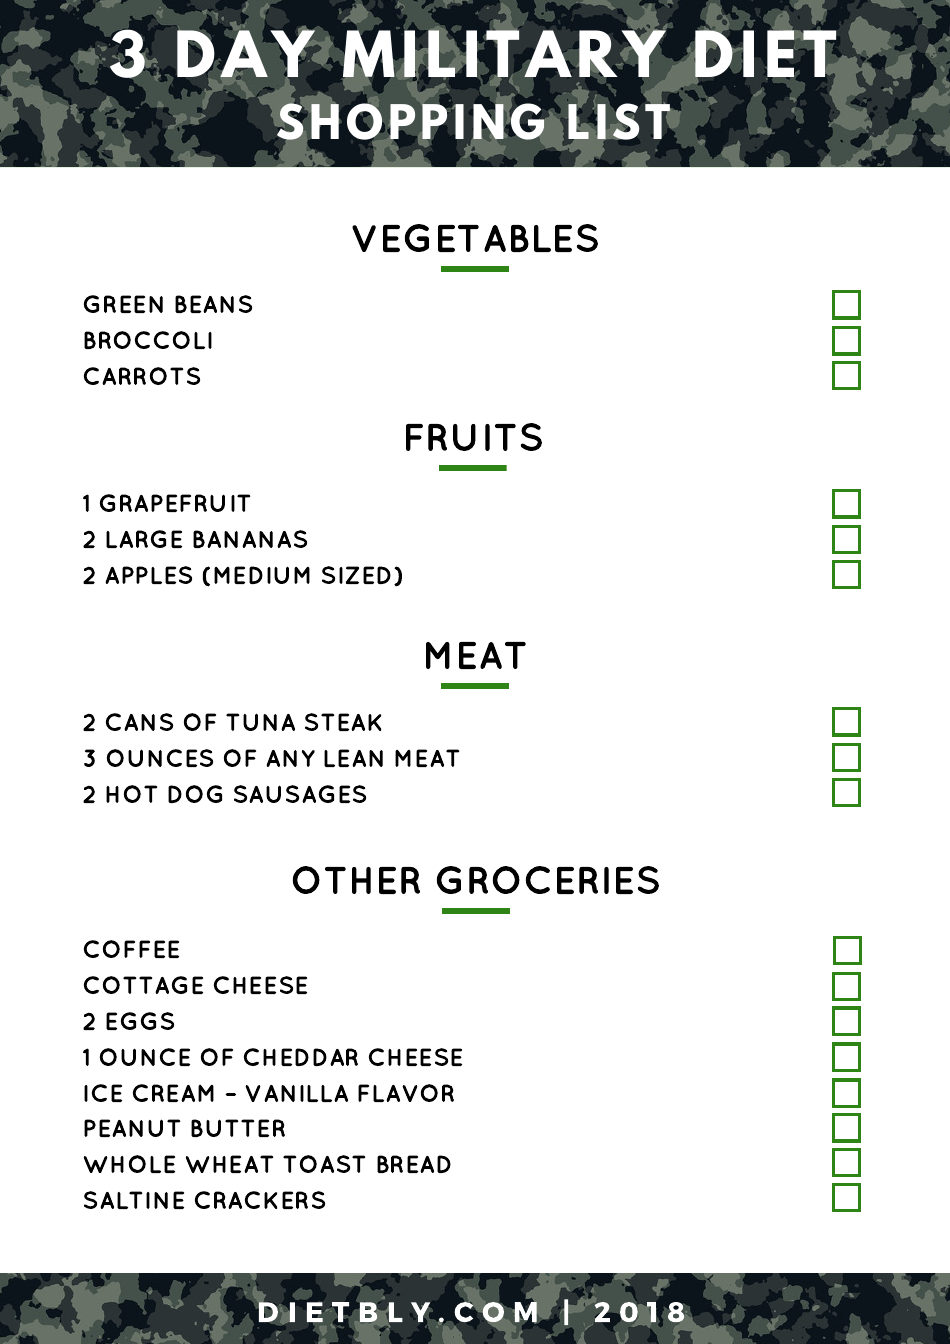 3 Day Military Diet Shopping List Template